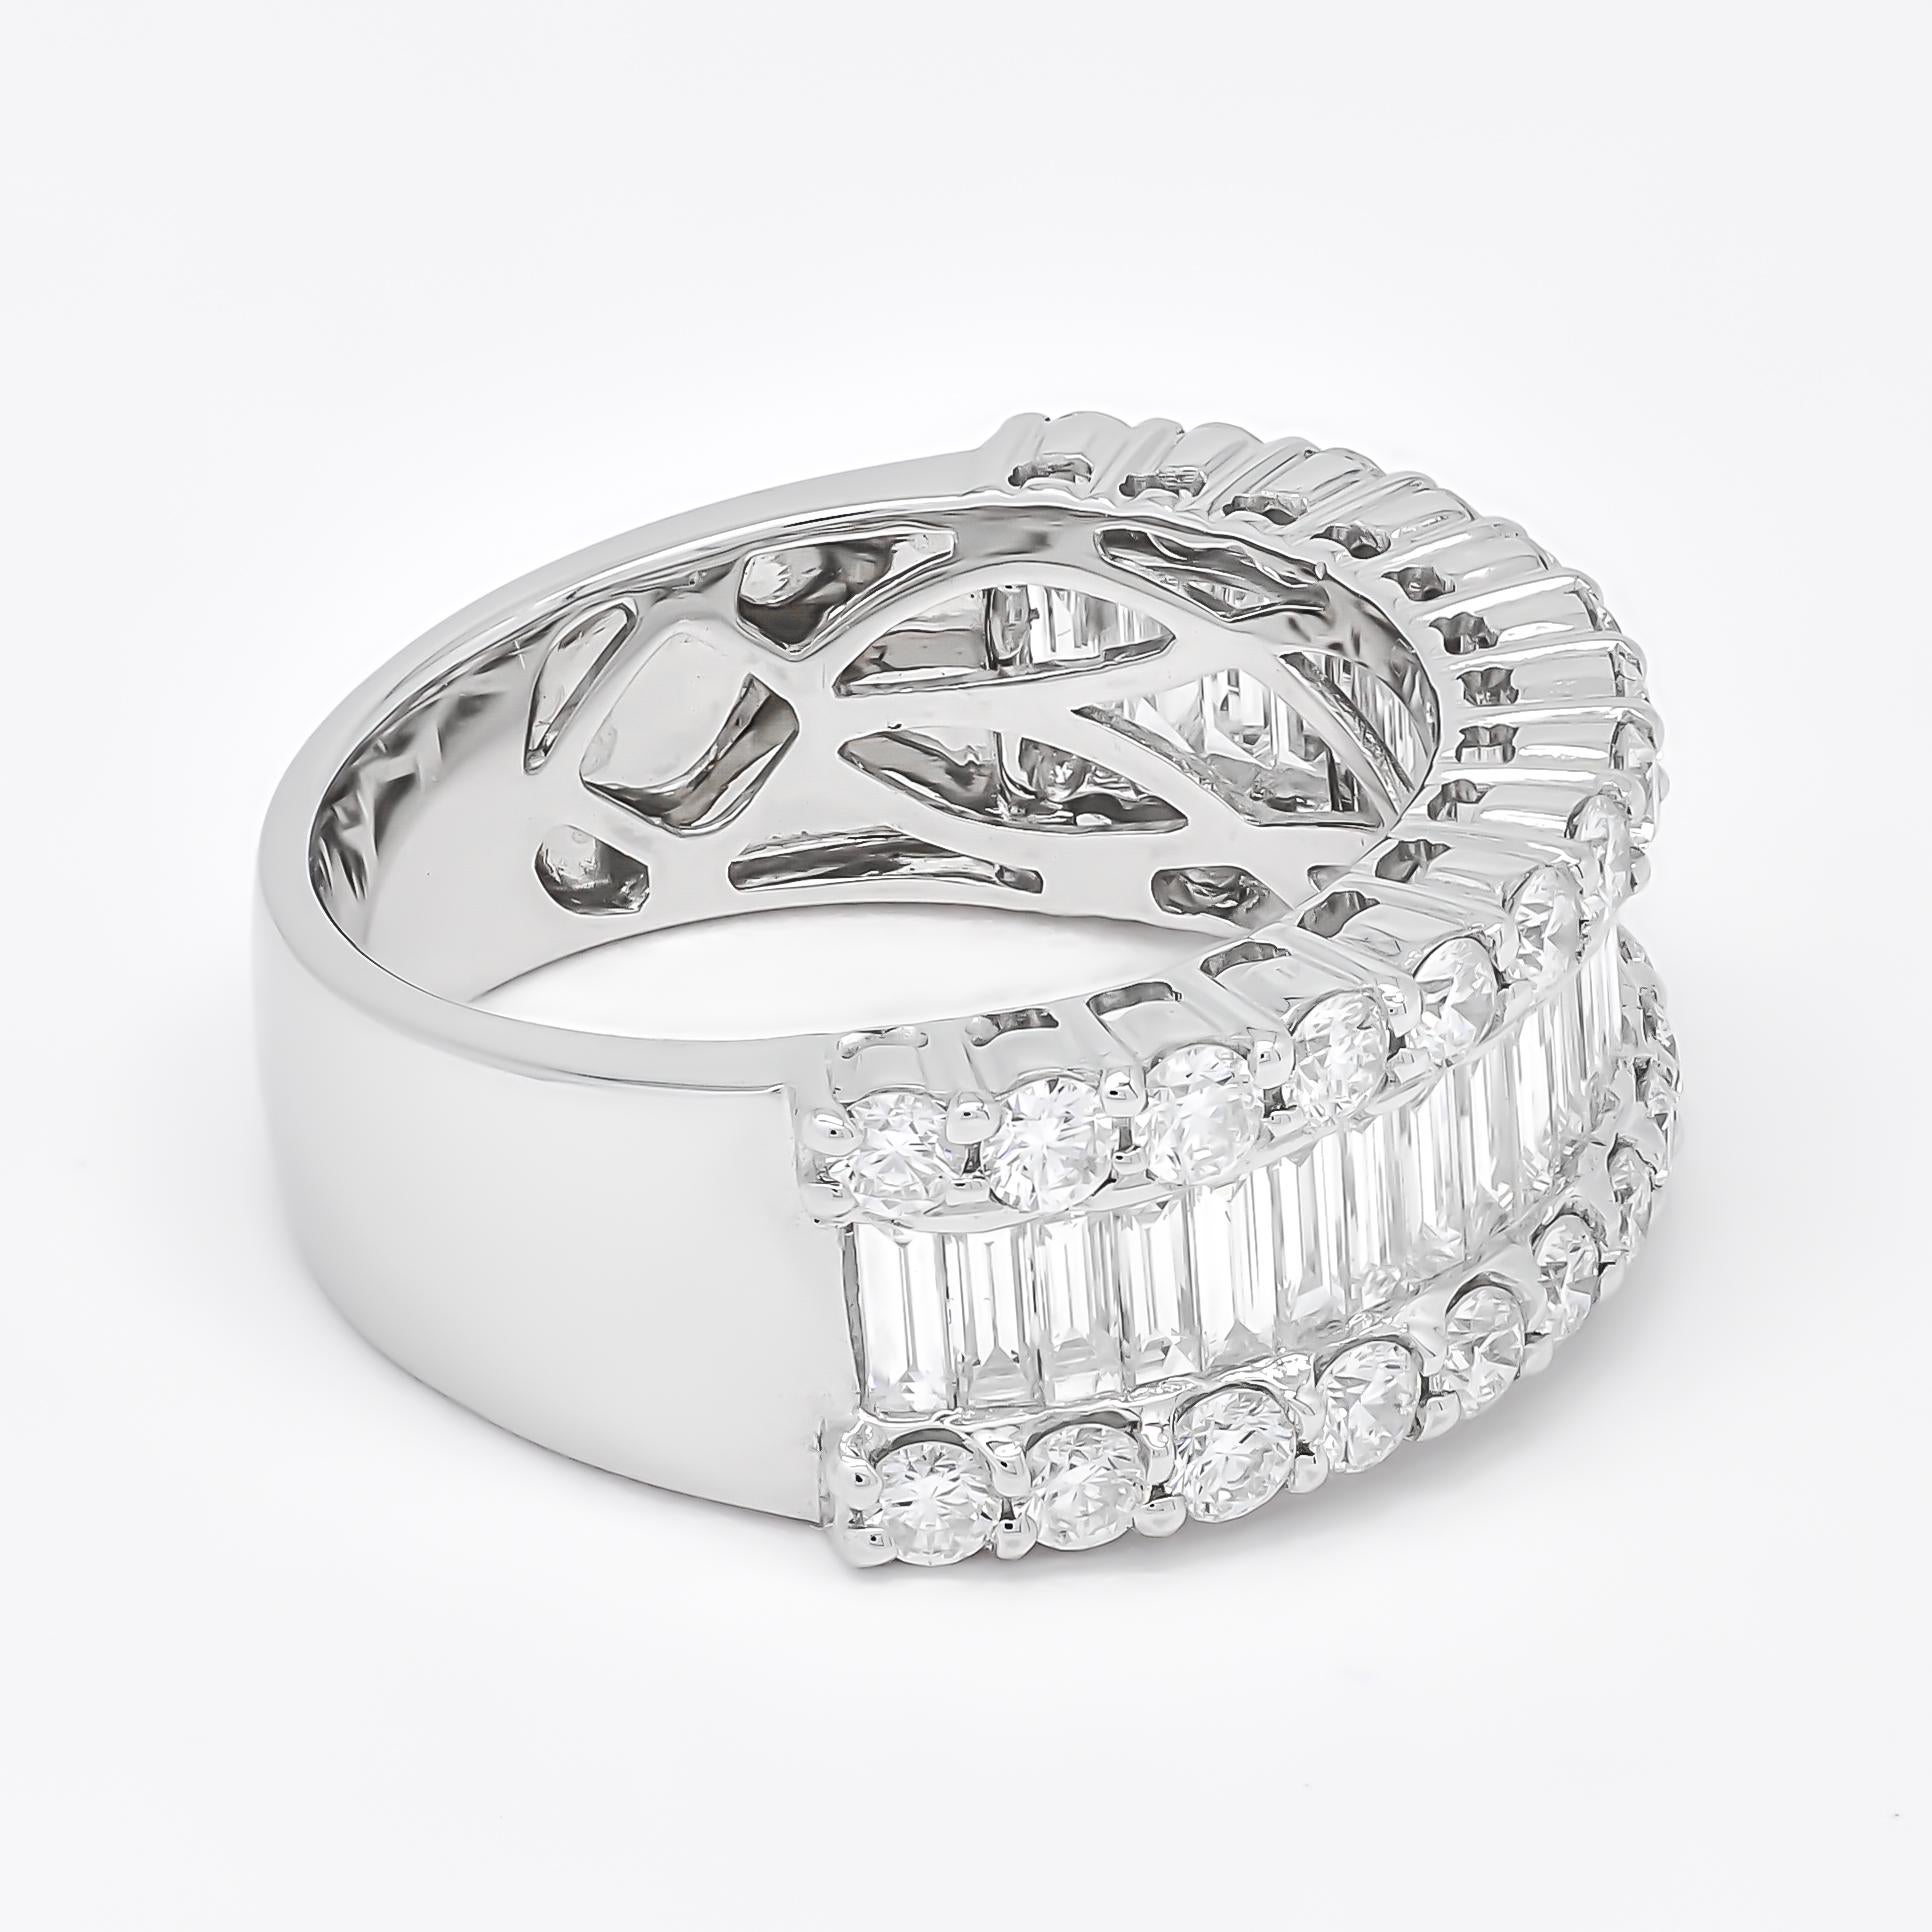 For Sale:  Natural Diamonds ct 2.30 18KT White Gold Cocktail Half Eternity Ring 4